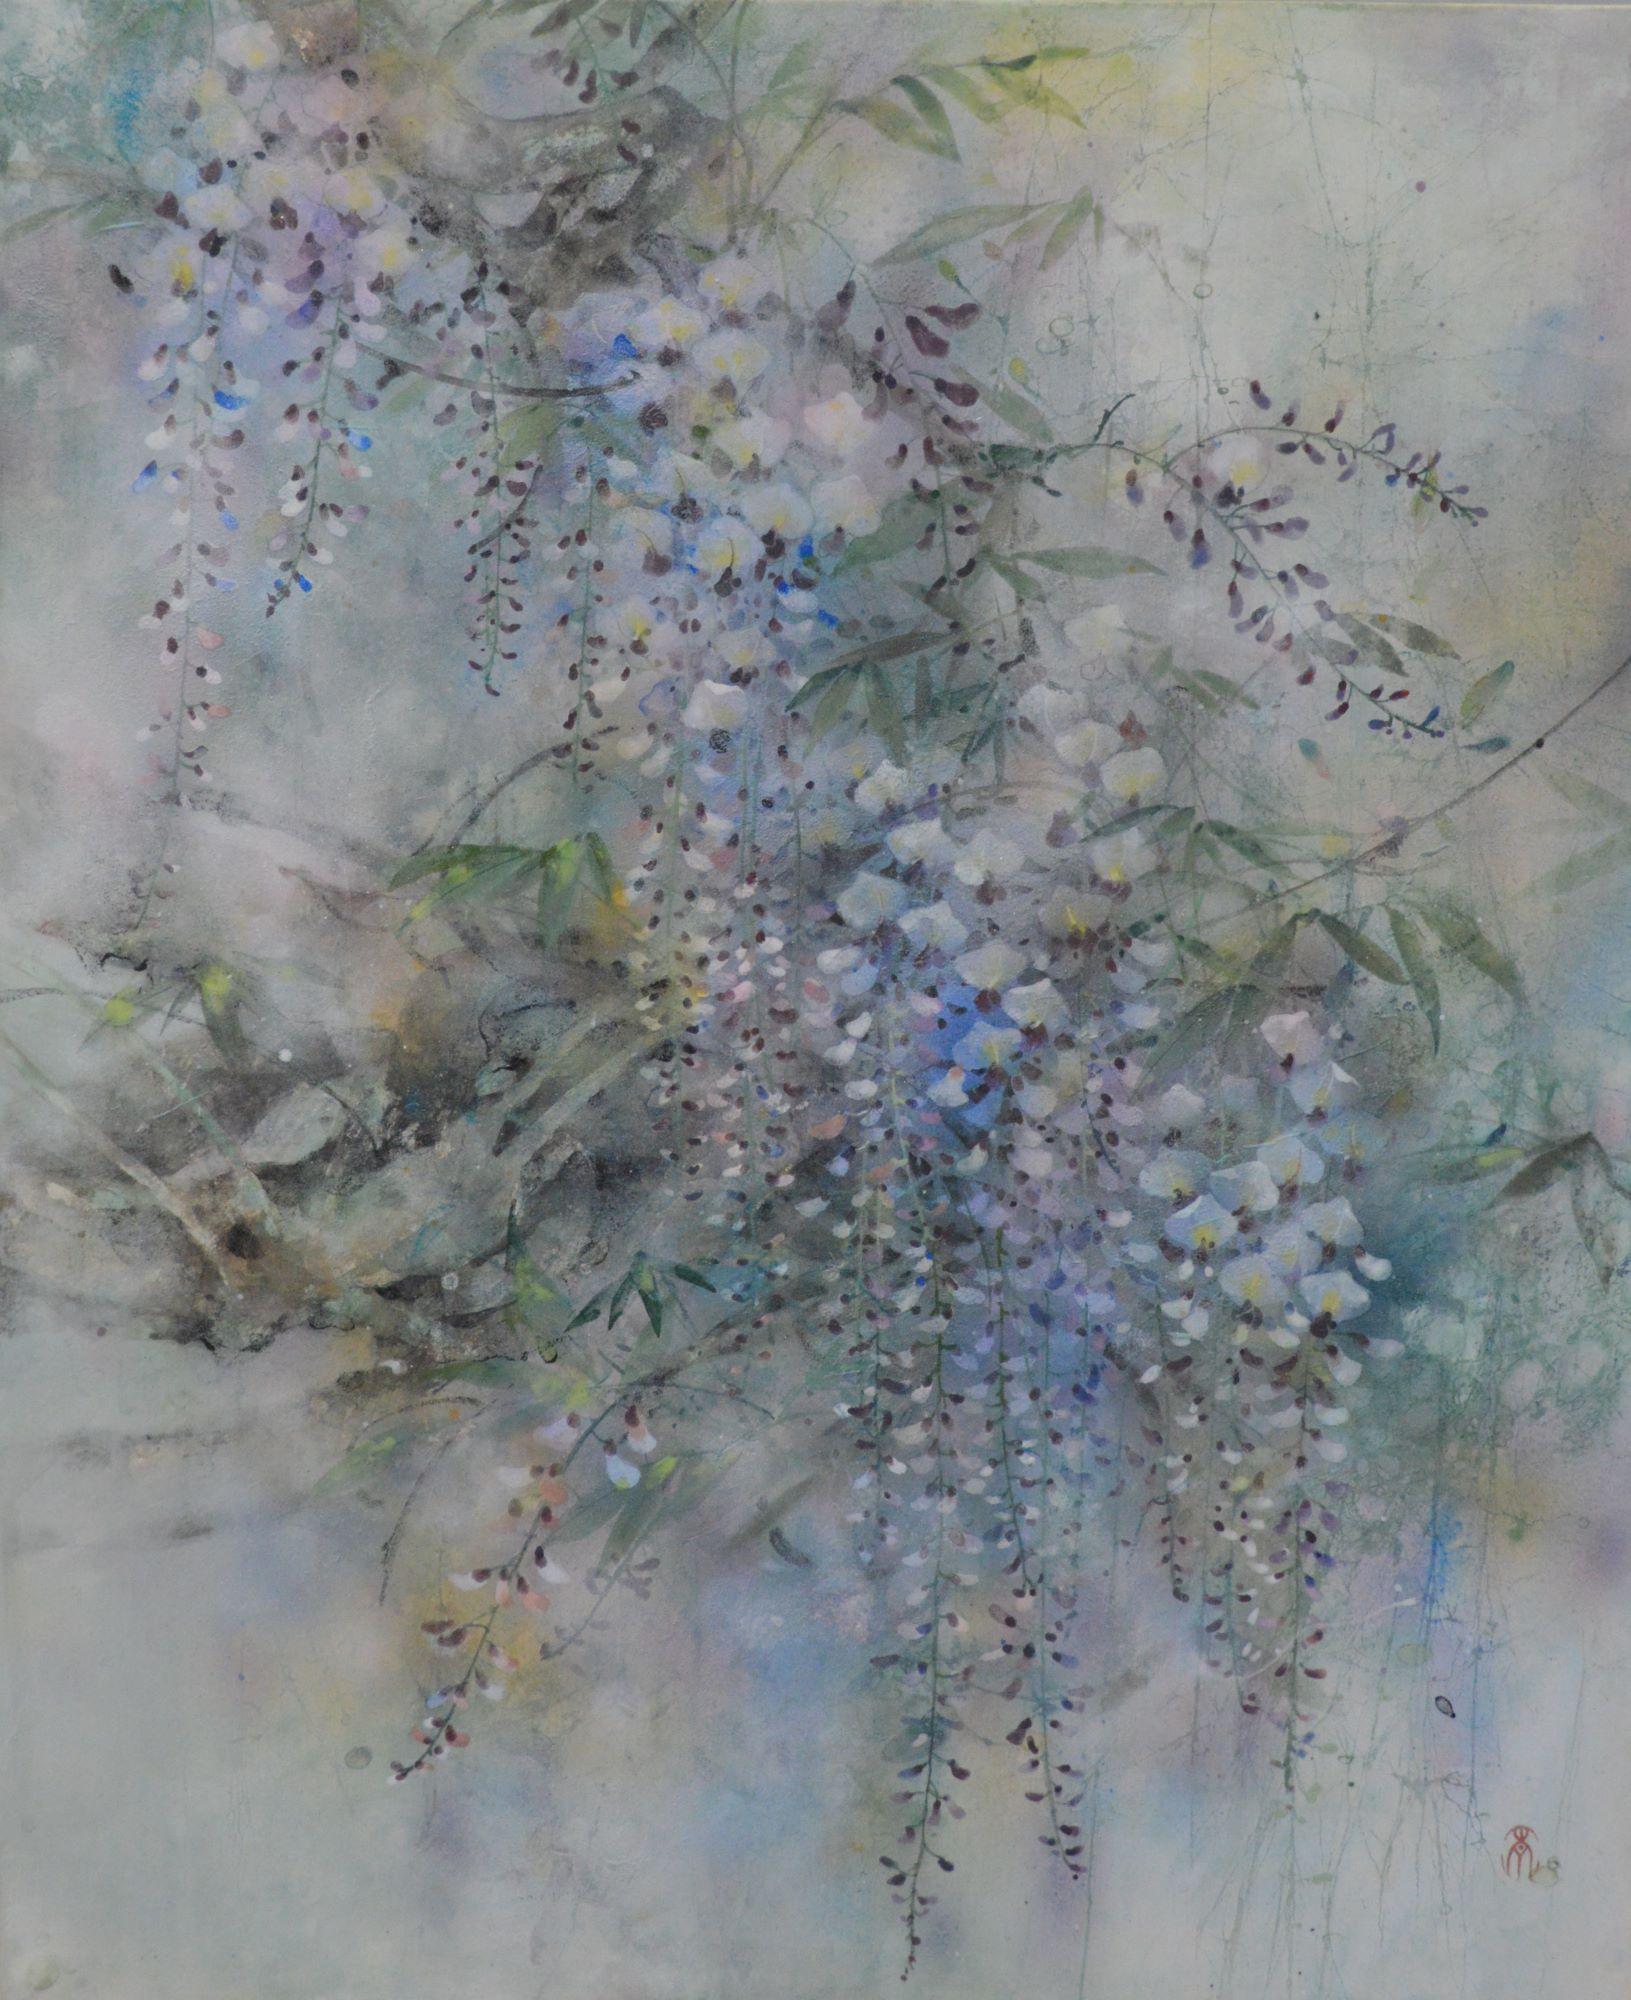 Bellflowers by Chen Yiching - Contemporary nihonga painting, violet flowers - Mixed Media Art by Yiching Chen